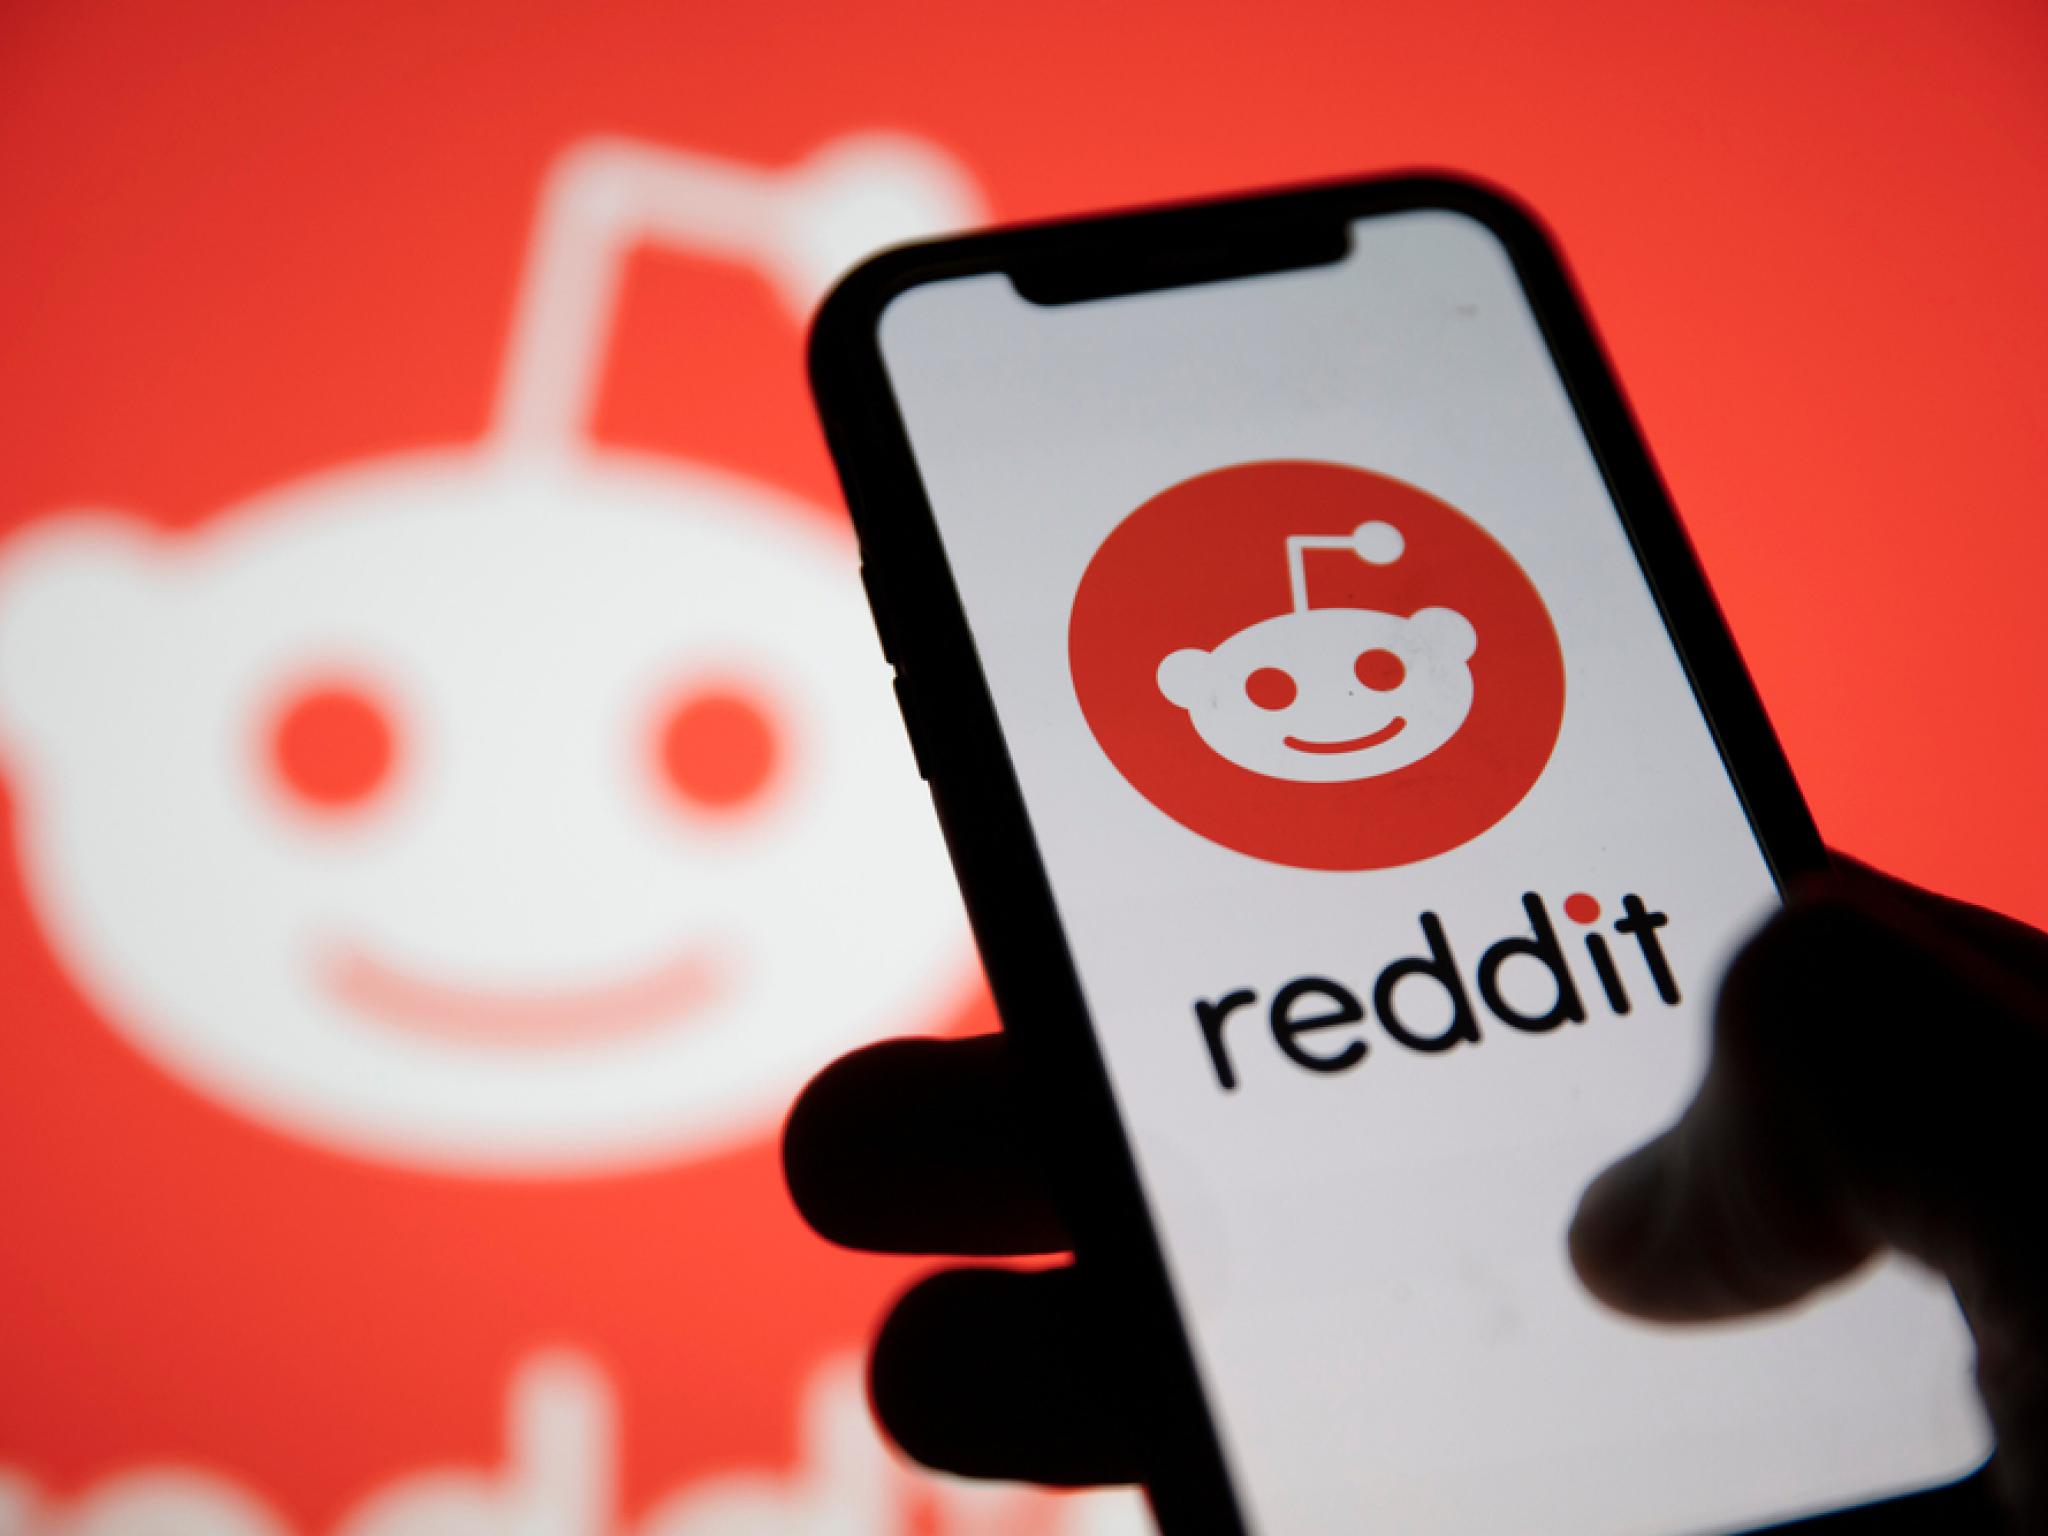  reddit-stock-down-12-in-5-days--redditors-anticipate-consolidation-before-next-wave-hits-early-july 